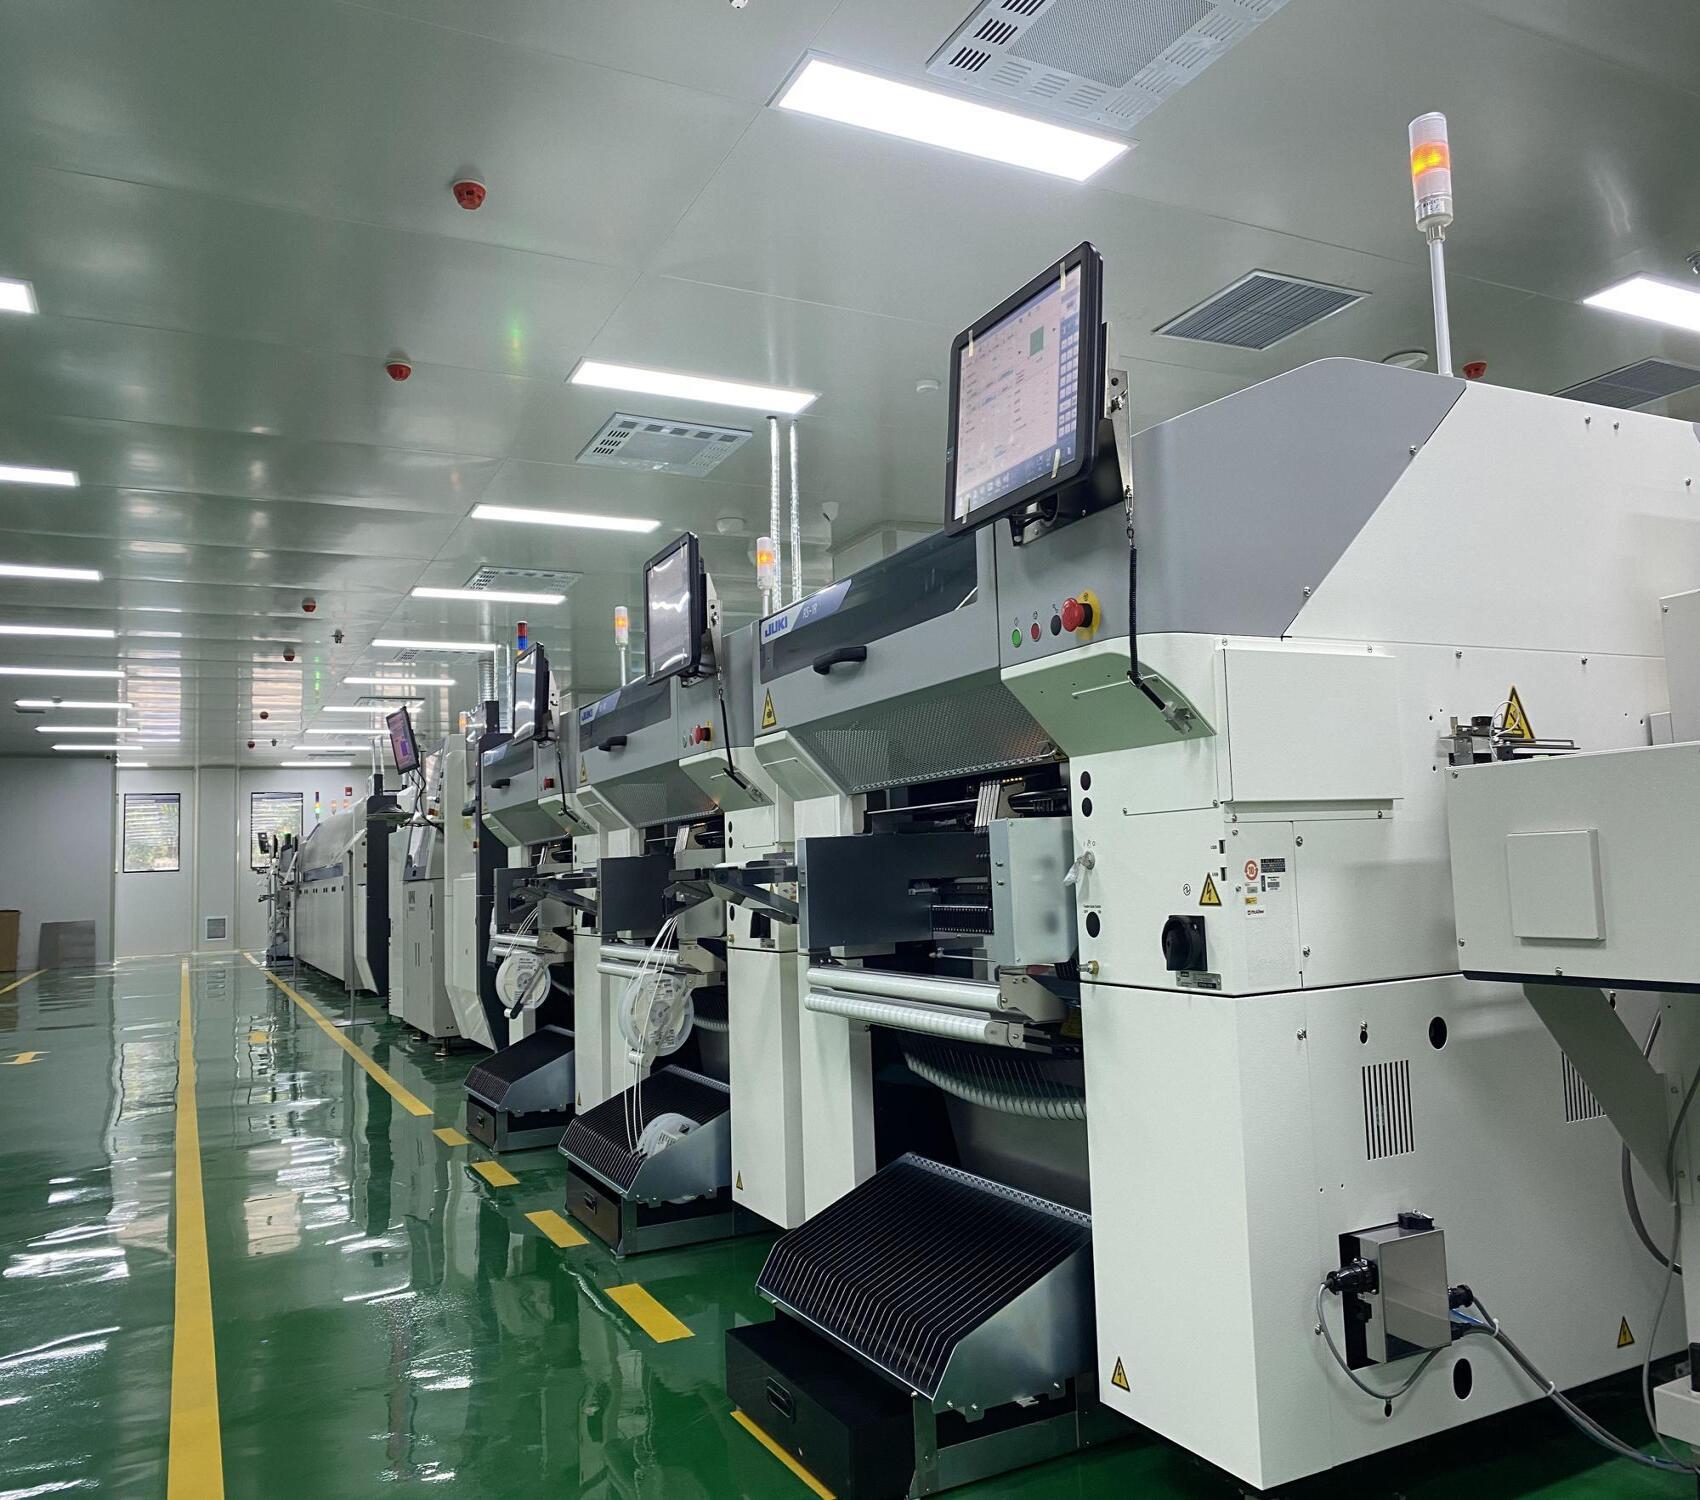 About PCB overseas warehouse